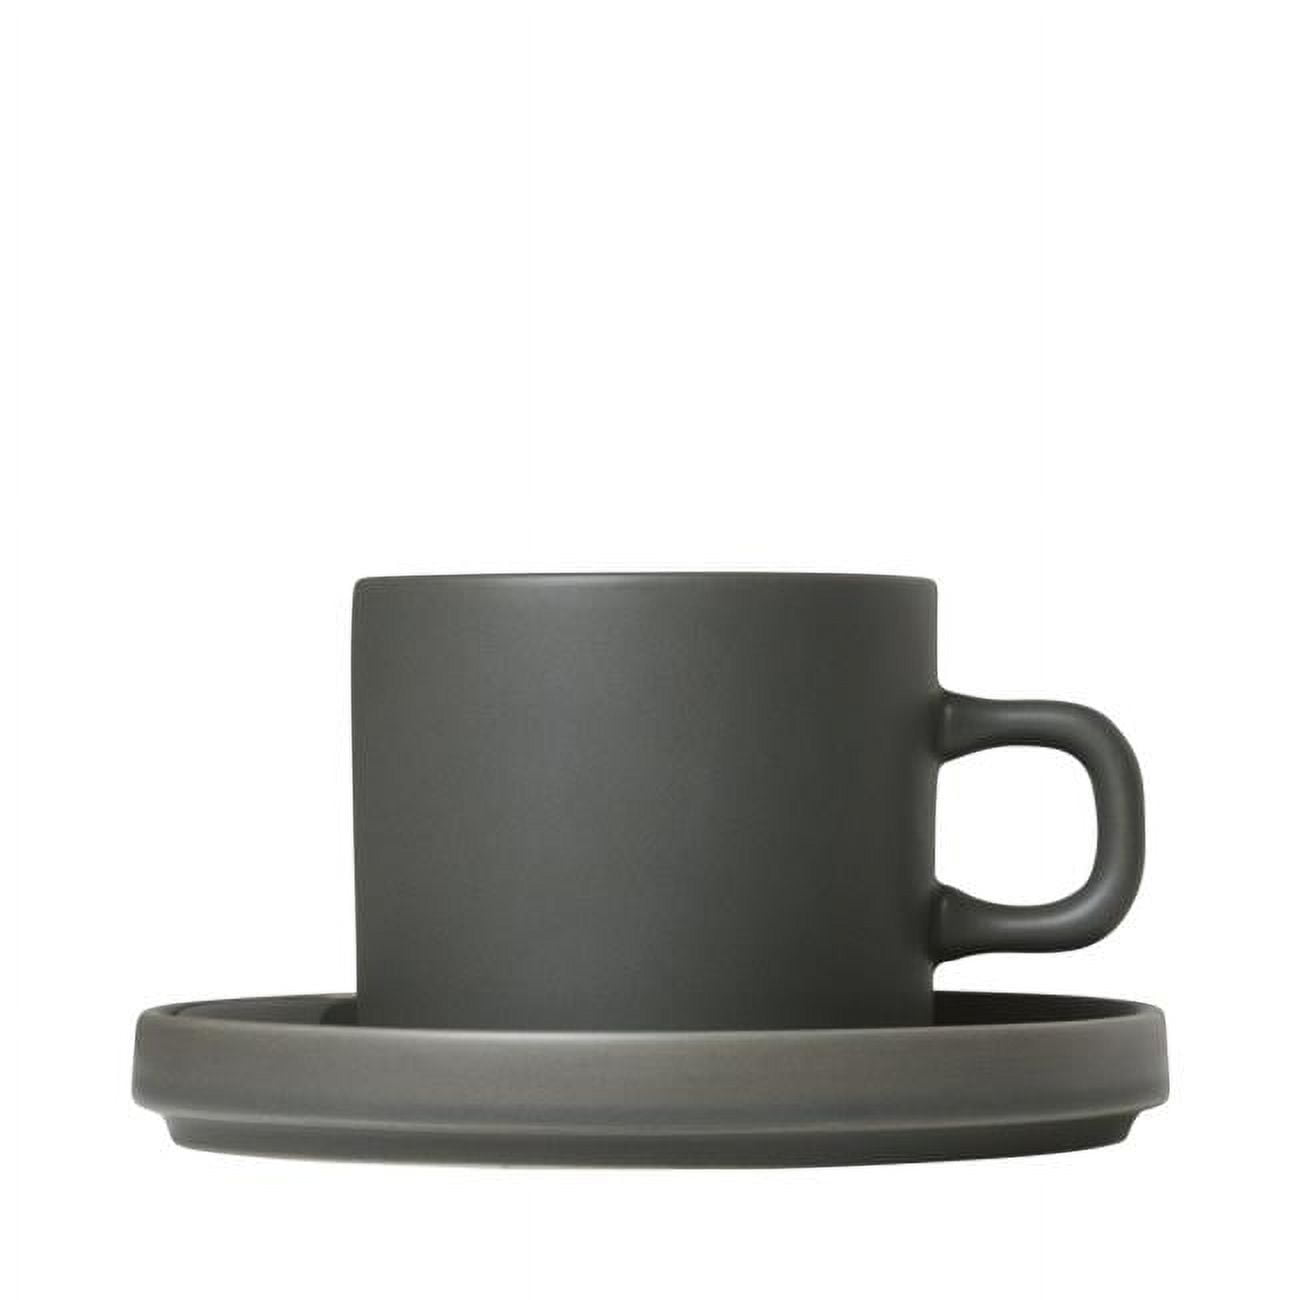 63909 7 Oz Mio Coffee Cups With Saucers, Agave Green - Set Of 2